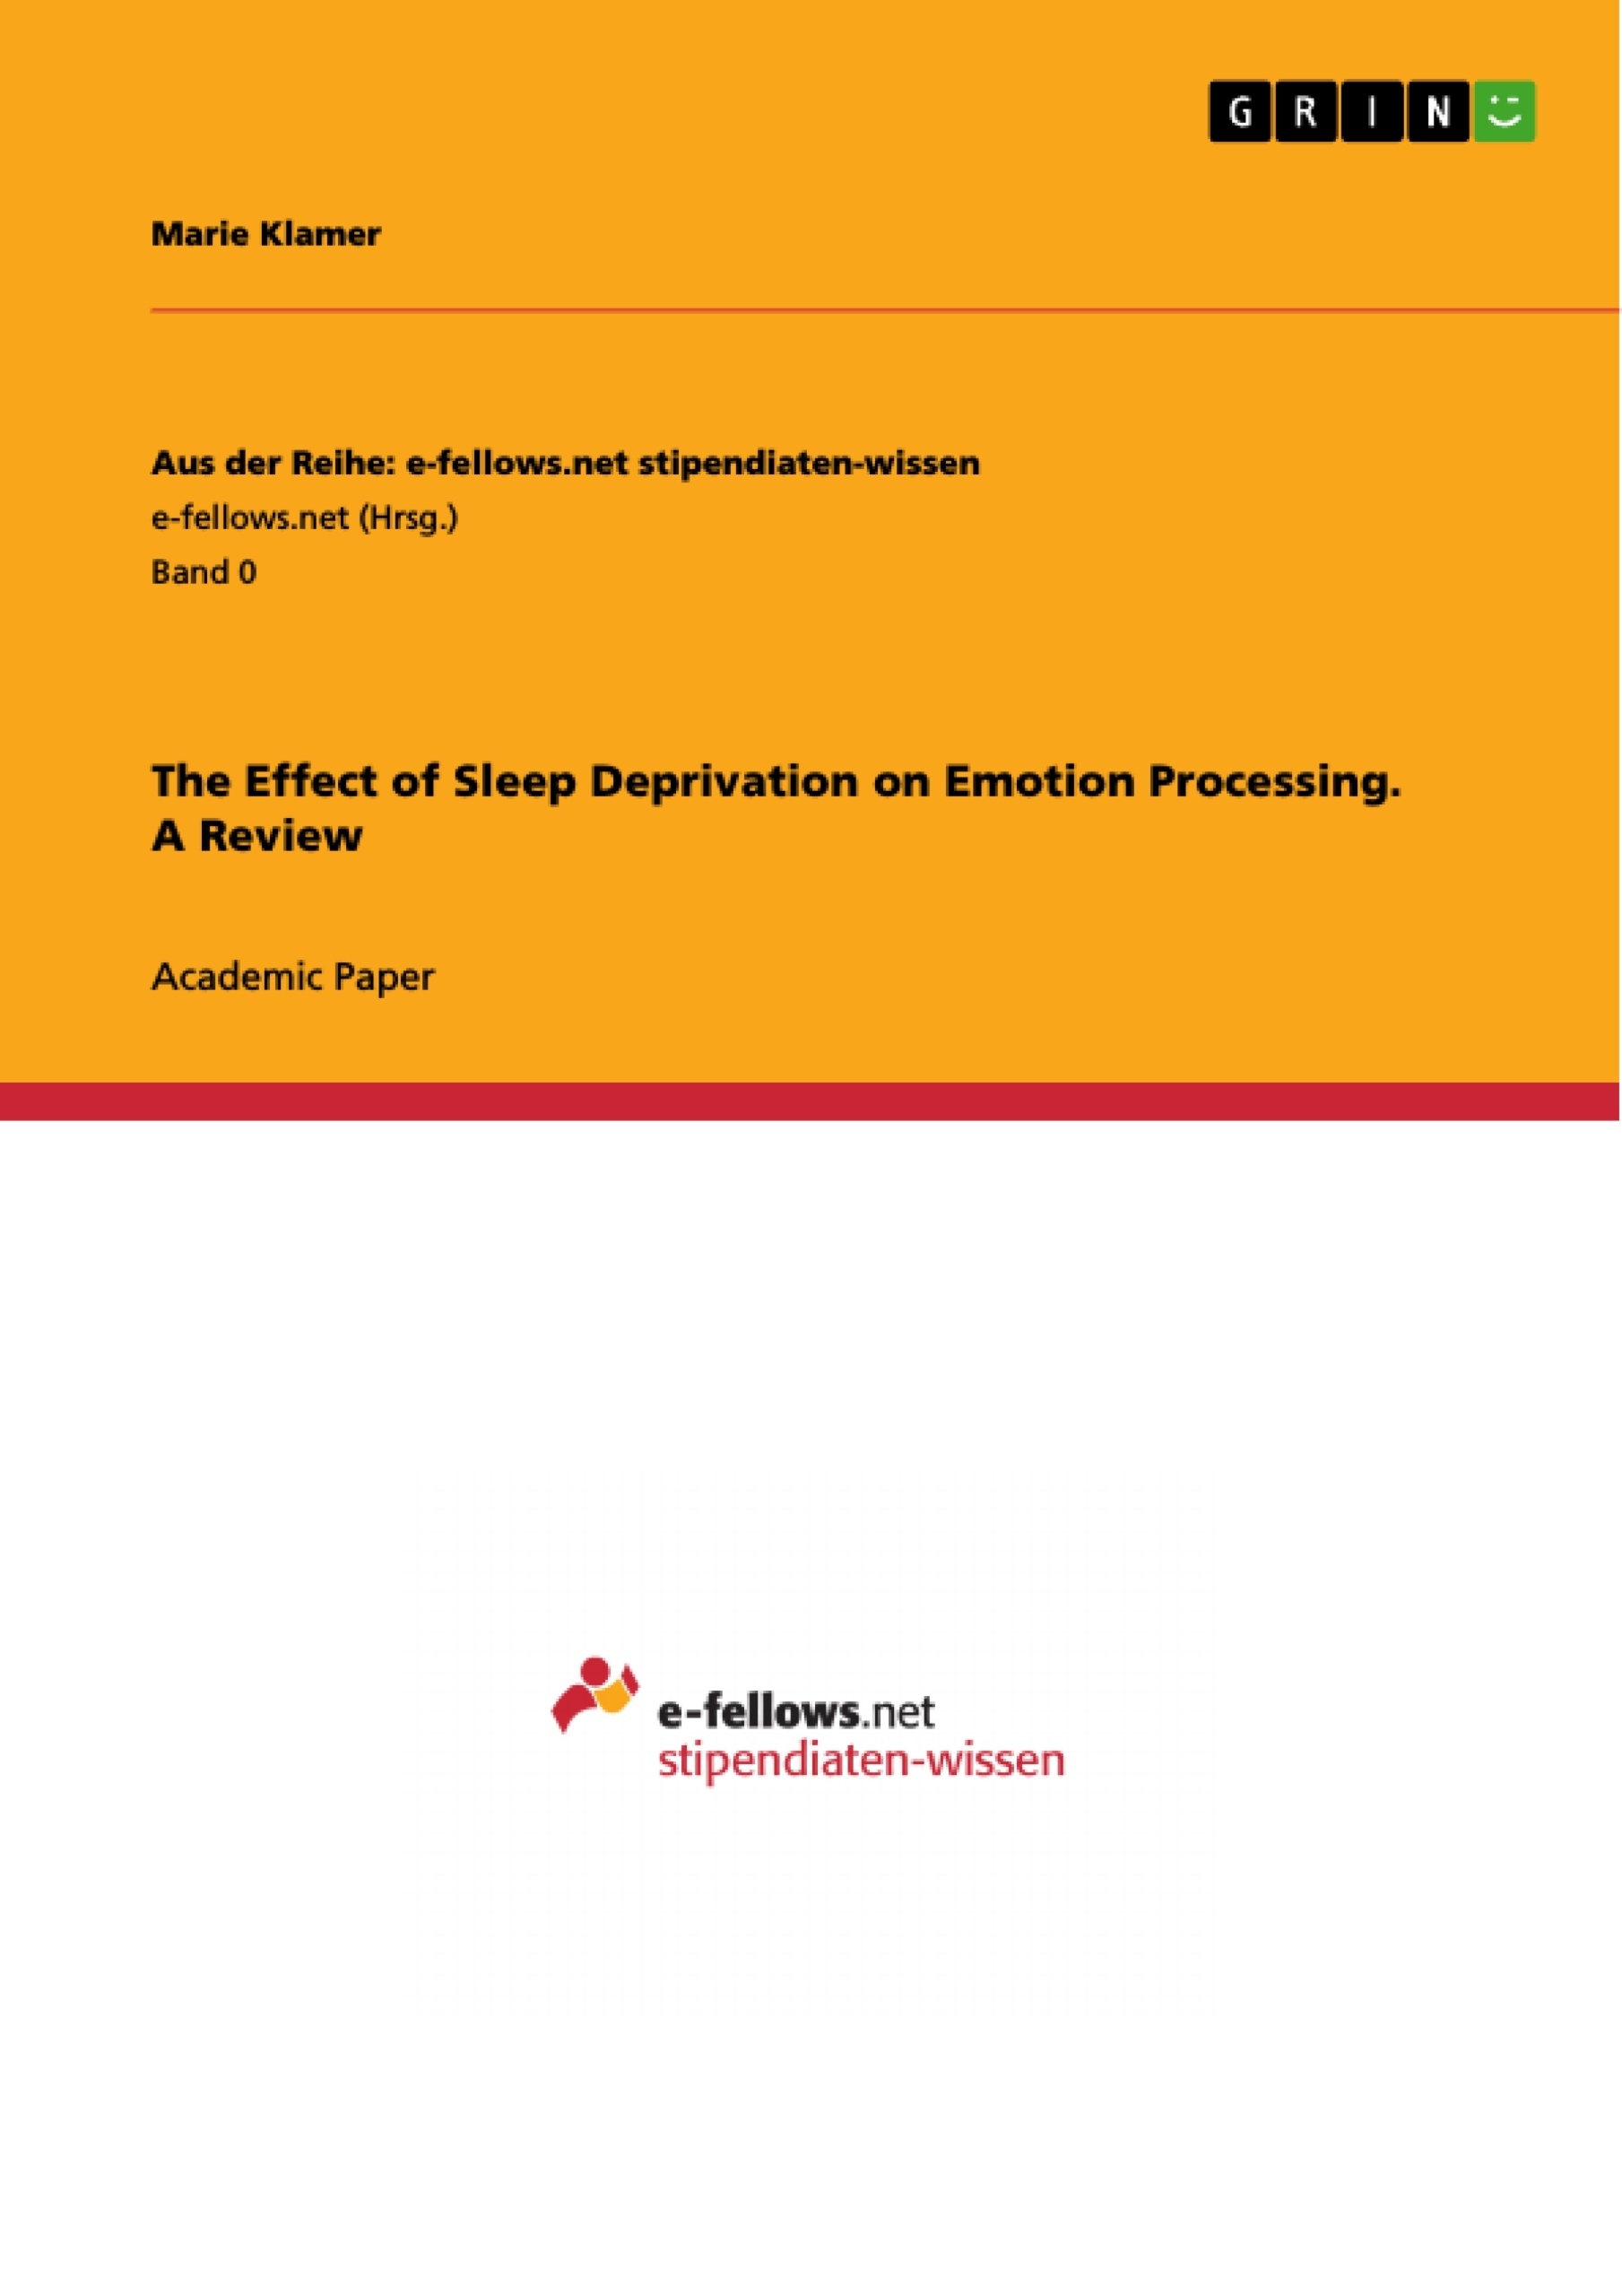 Title: The Effect of Sleep Deprivation on Emotion Processing. A Review